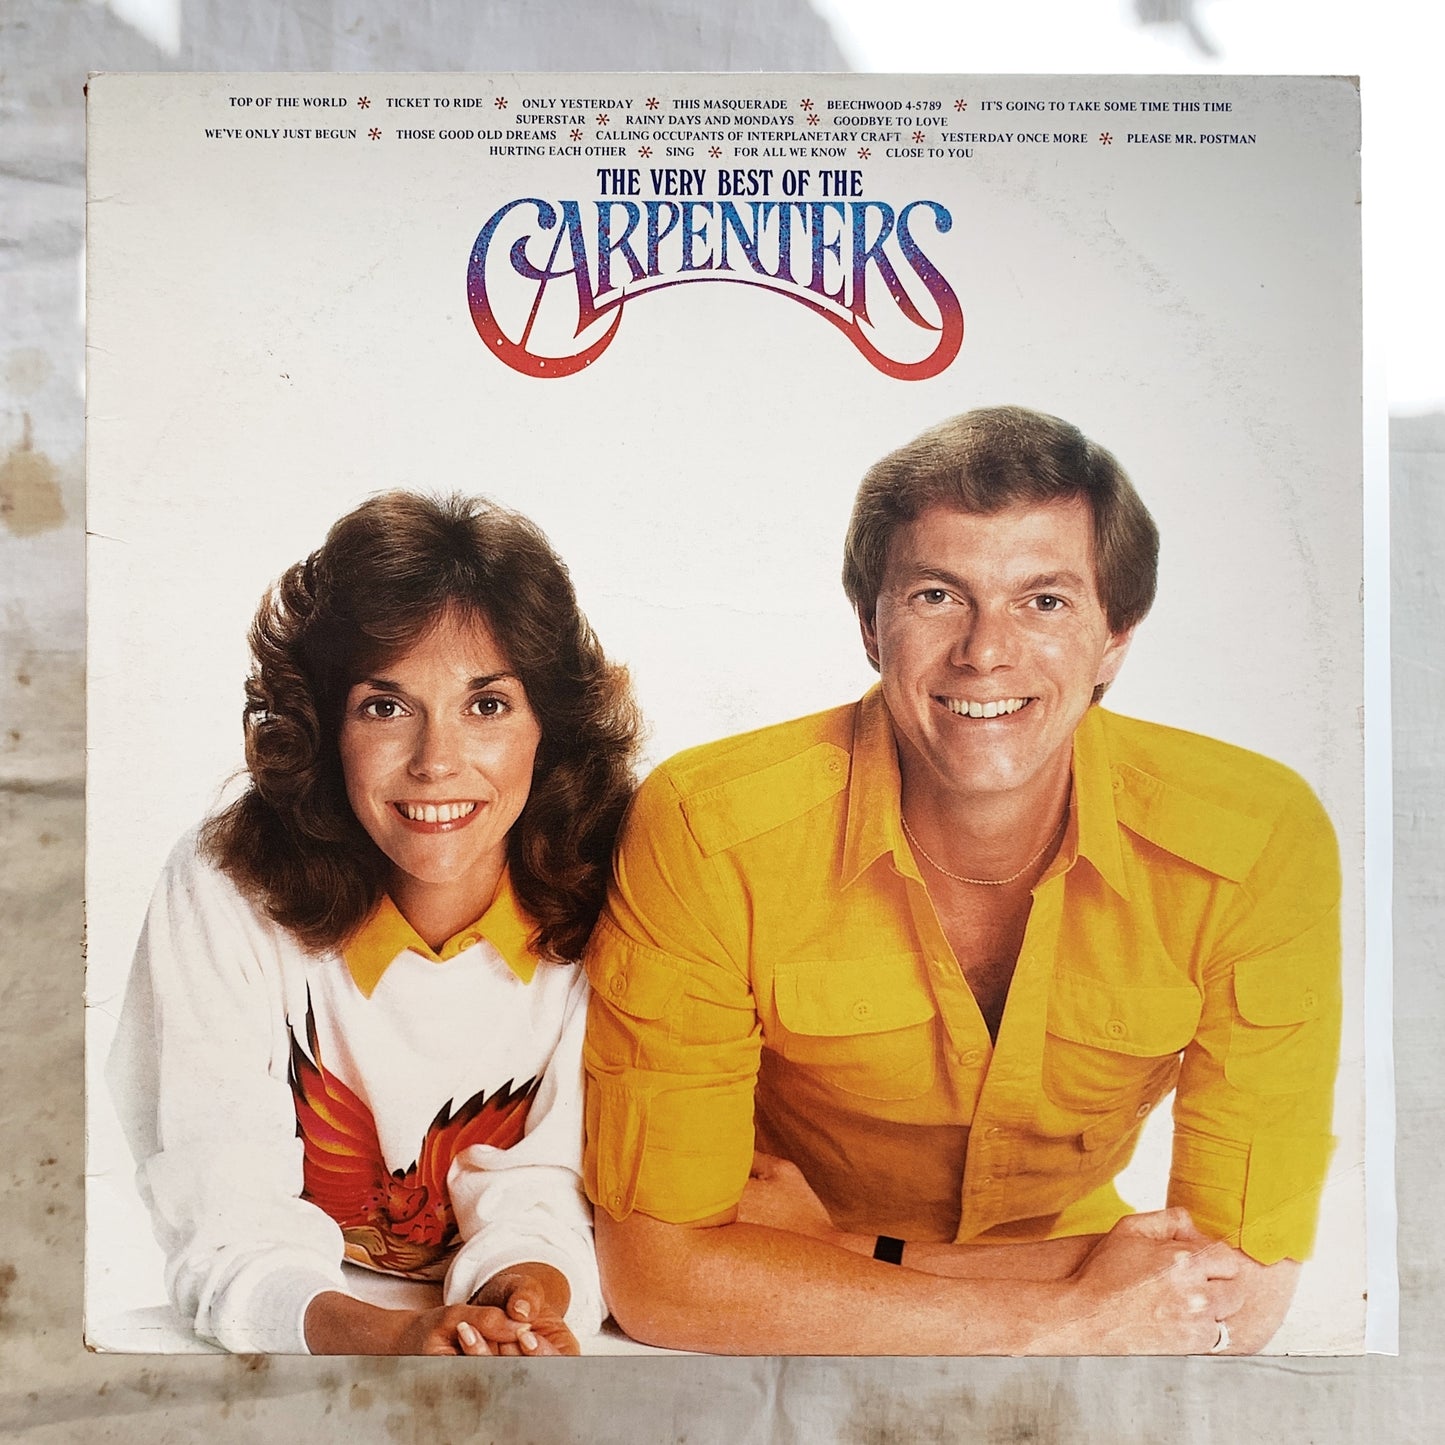 The Carpenters / The Very Best Of